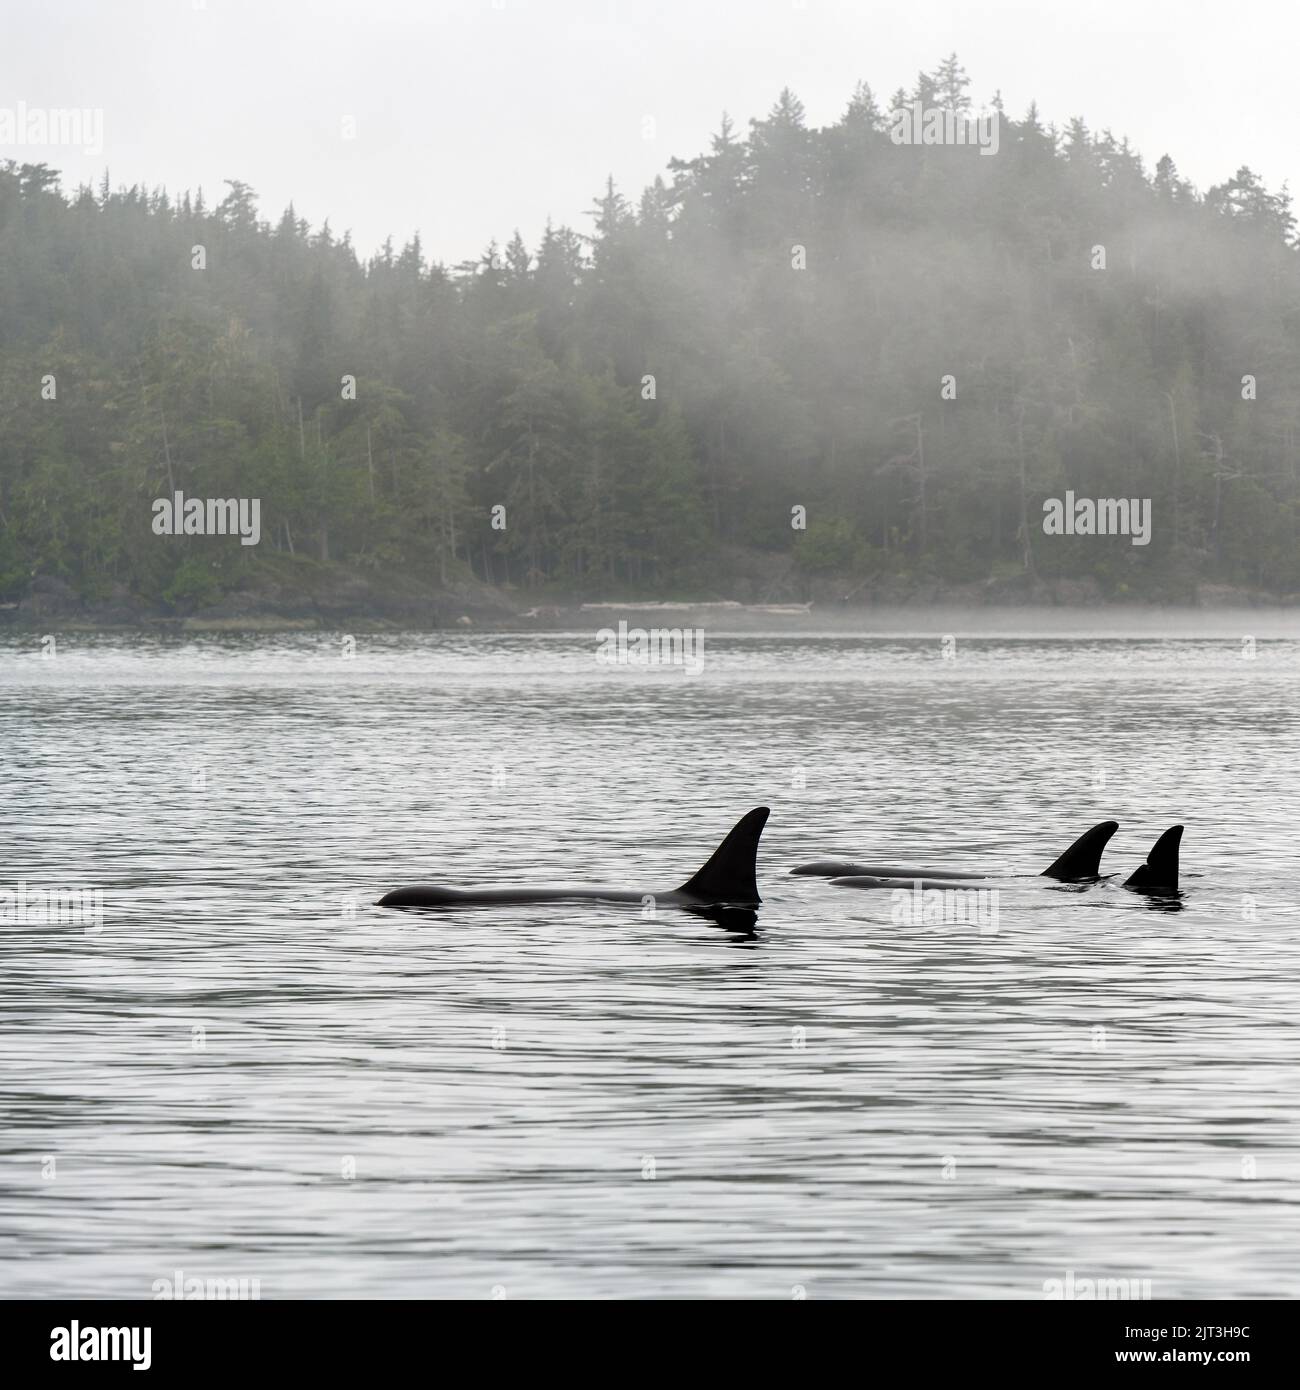 Three Orca or Killer Whales (Orcinus orca) on whale watching tour, Telegraph Cove, Vancouver Island, British Columbia, Canada. Stock Photo